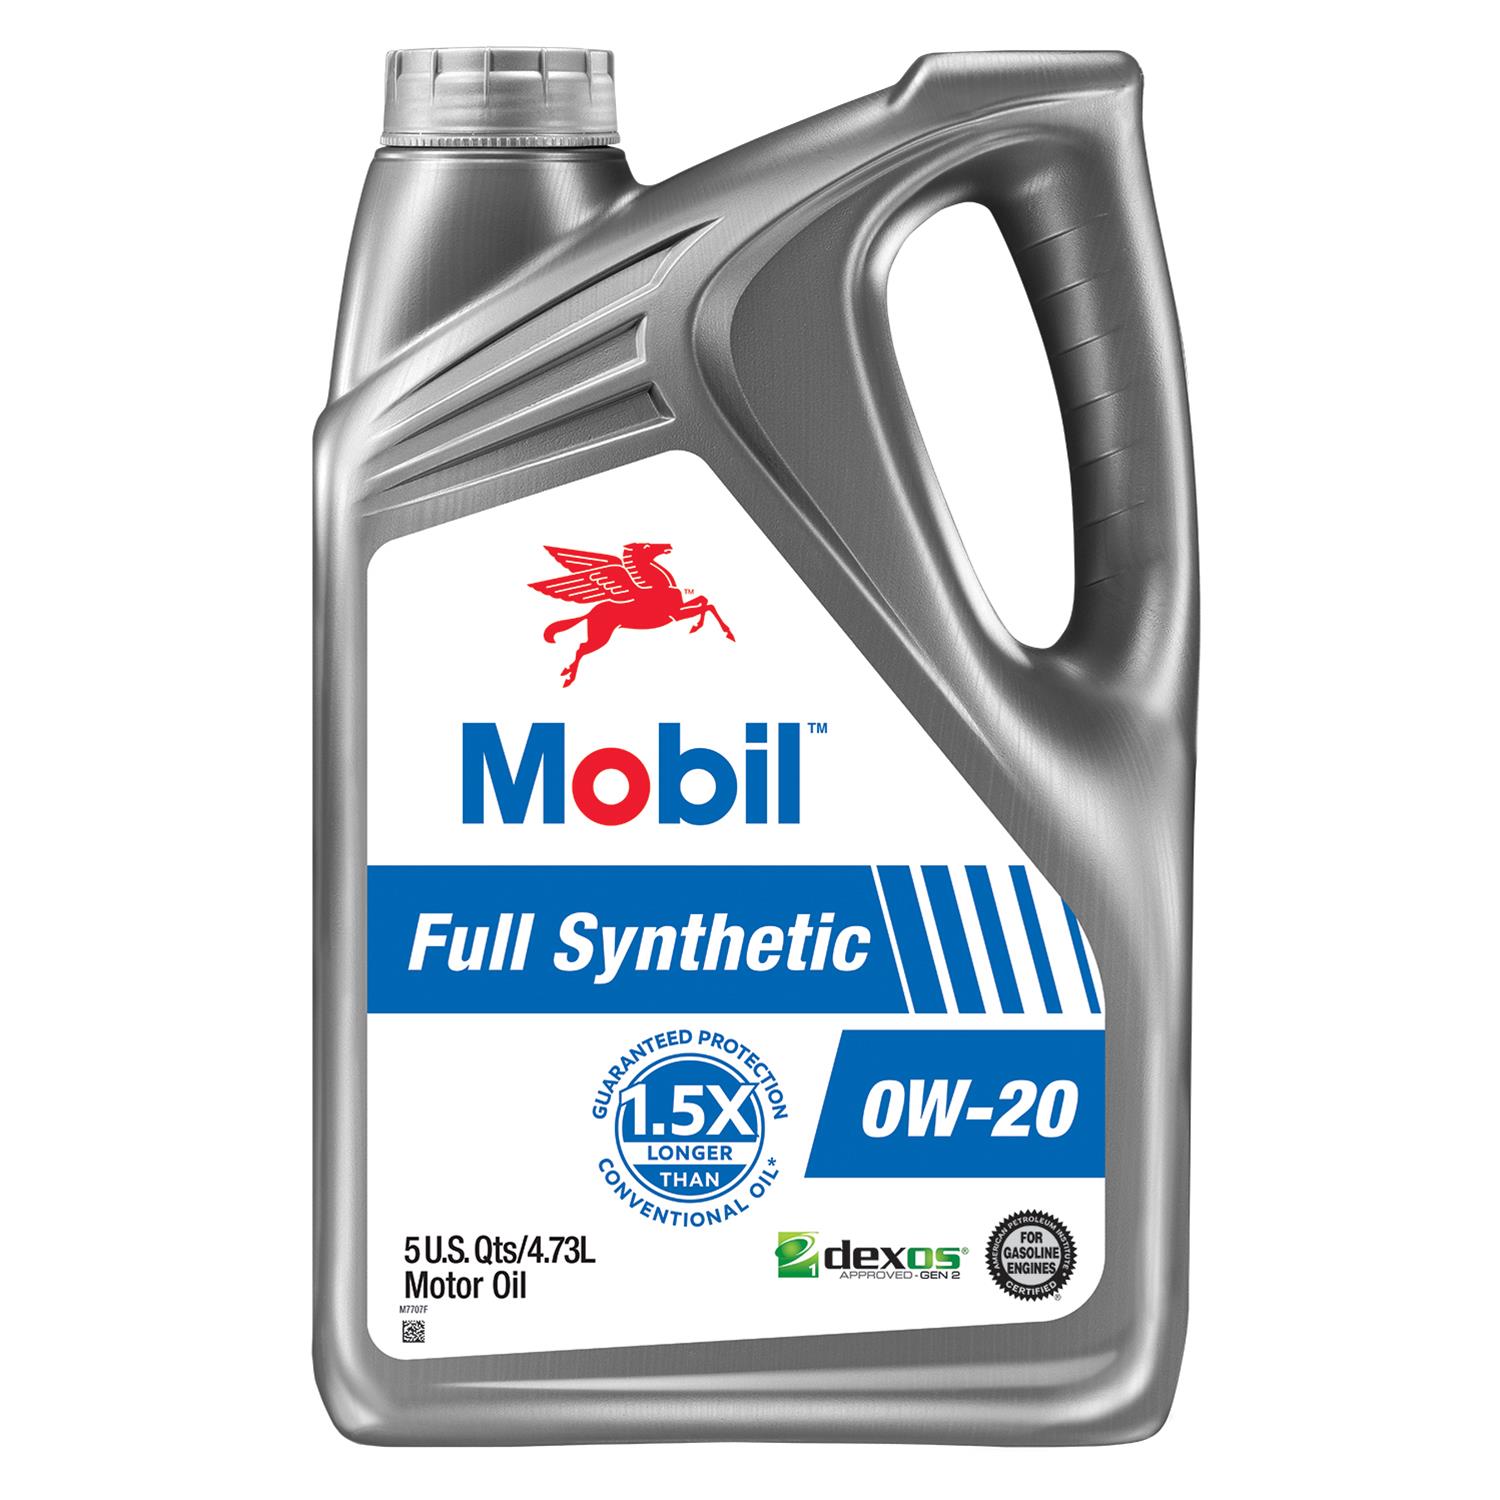 Масло мобил 0w20. Mobil 1 Full Synthetic 5w-30. Mobil 1 Advanced Full Synthetic 5w30. Мобил 5w30 Advanced Full Synthetic. Mobil 1 Advanced Full Synthetic 5w30 4.73 л.